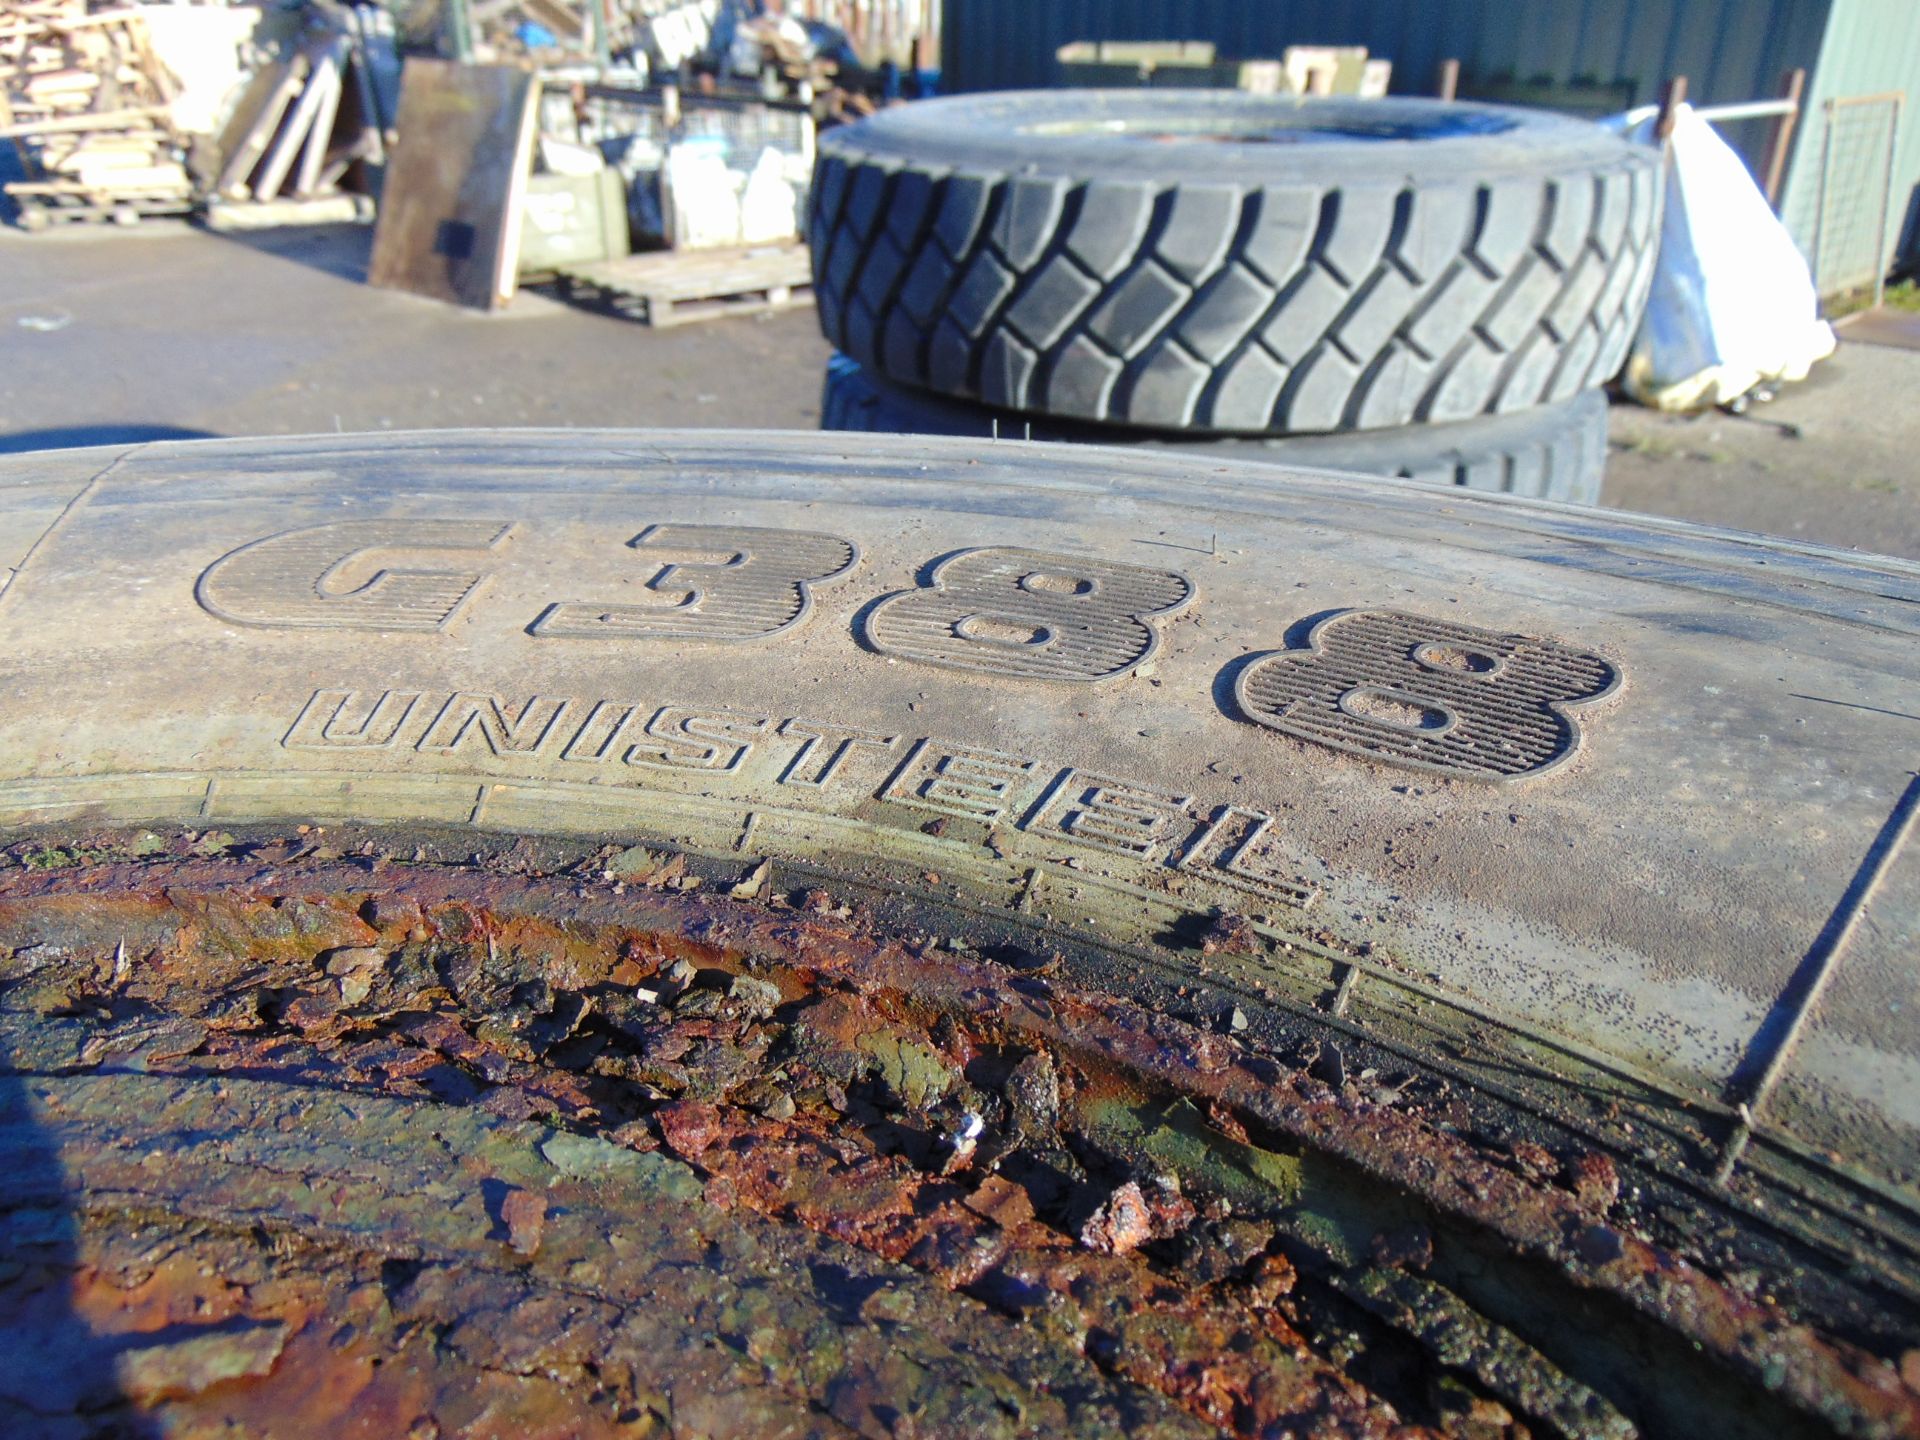 Qty 4 x Goodyear 12.00R20 G388 Unisteel tyres, unused still with bobbles fitted on 8 stud rims - Image 7 of 8